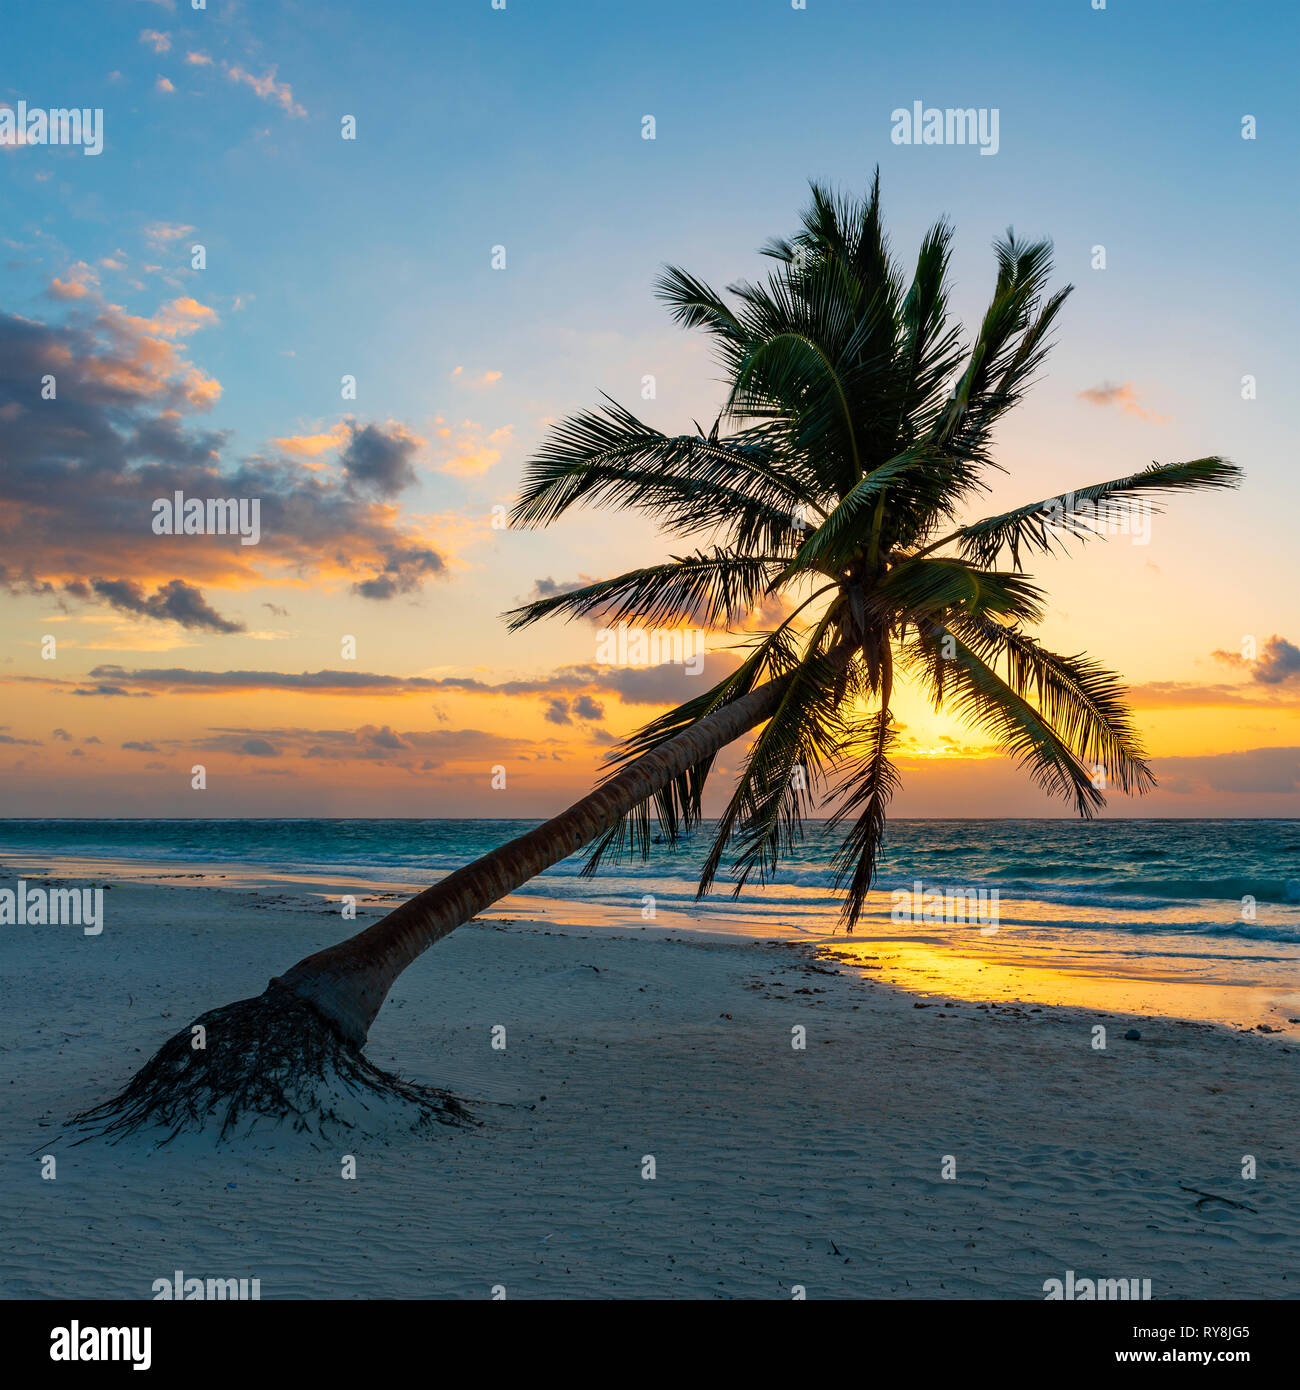 Square photograph of a magnificent palm tree on the beach of Tulum at sunrise, Quintana Roo state, Yucatan Peninsula, Mexico. Stock Photo